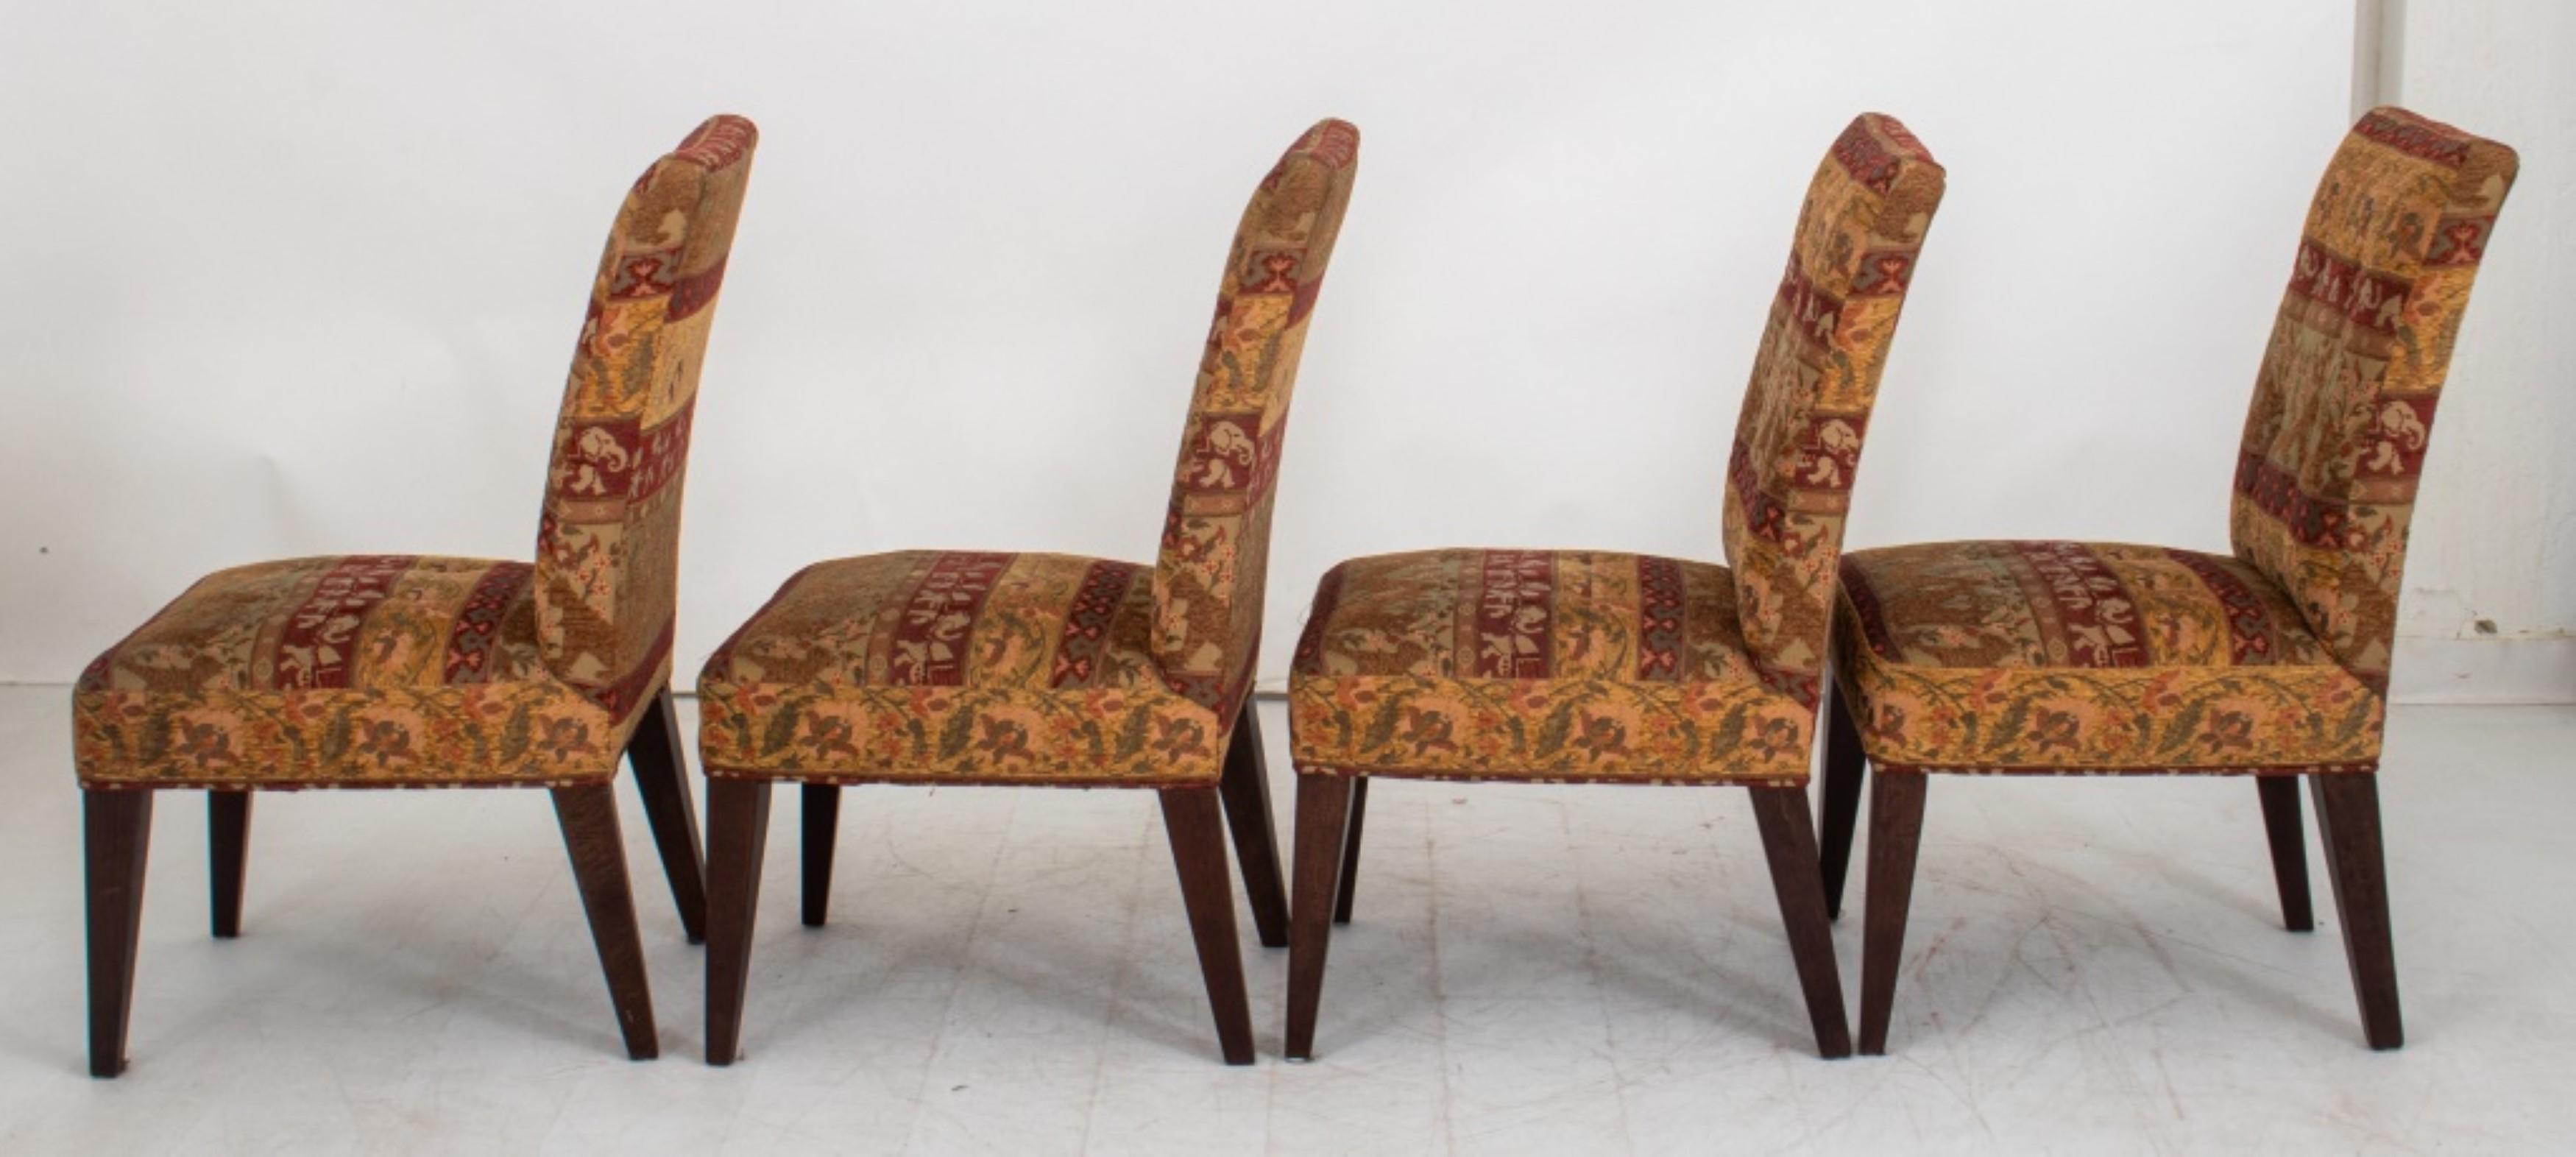  Set of four Lee Industries Elephant Motif Upholstered Dining Chairs. Here are the details:

Brand: Lee Industries
Style: Elephant Motif
Type: Upholstered Dining Chairs
Provenance: From a New York City collection
Keywords: Furniture, Seating, Side